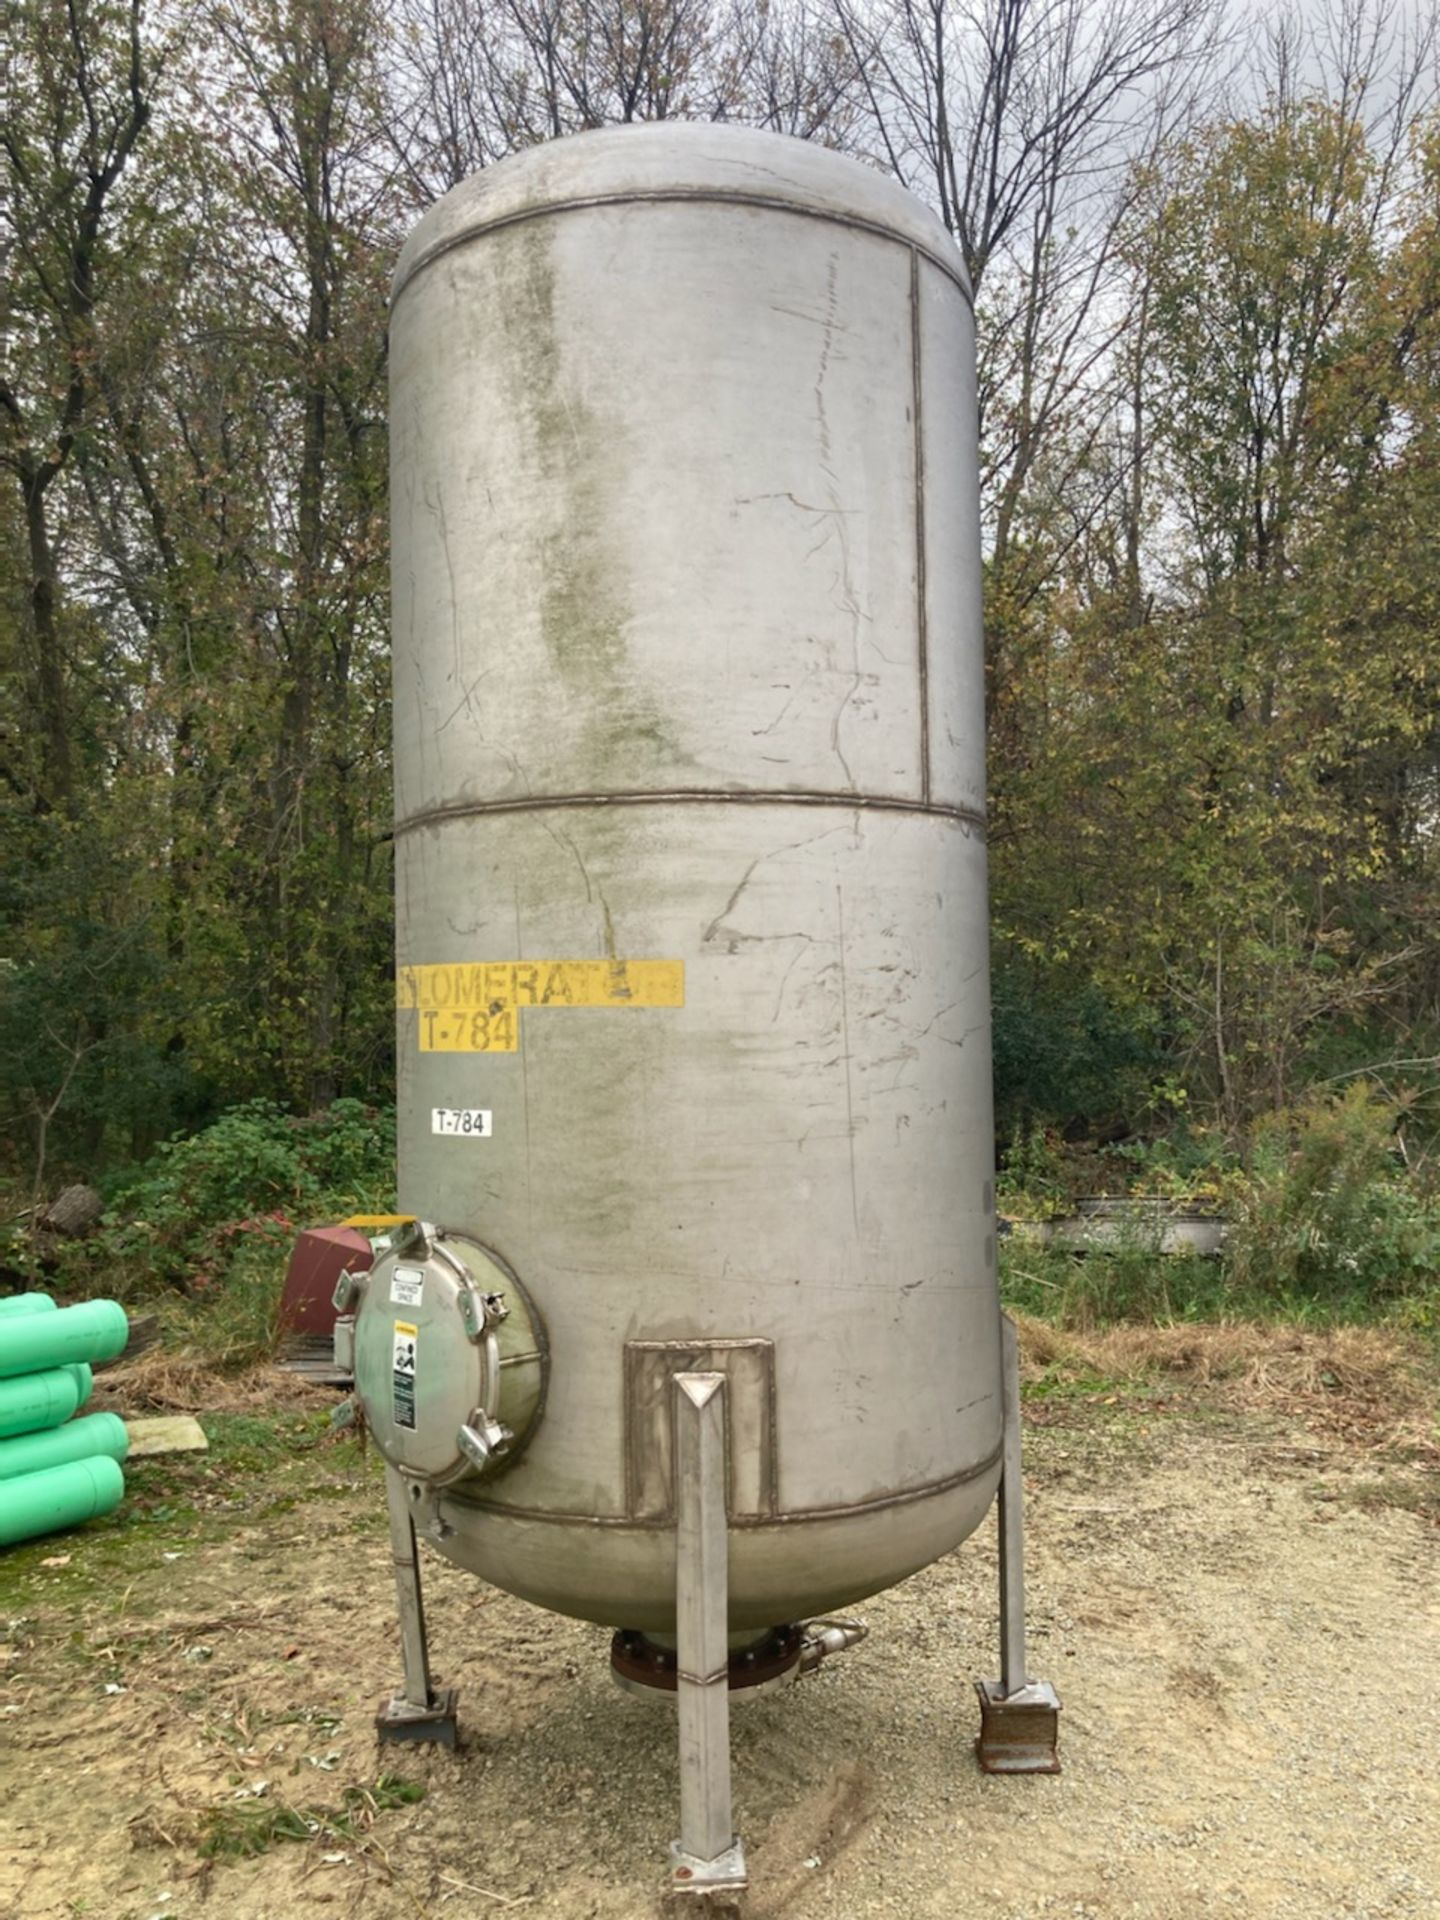 Stainless Steel Tank with Manway - Approximate 825 Gallons. RIGGING/LOADING FEE $150 - Image 2 of 2